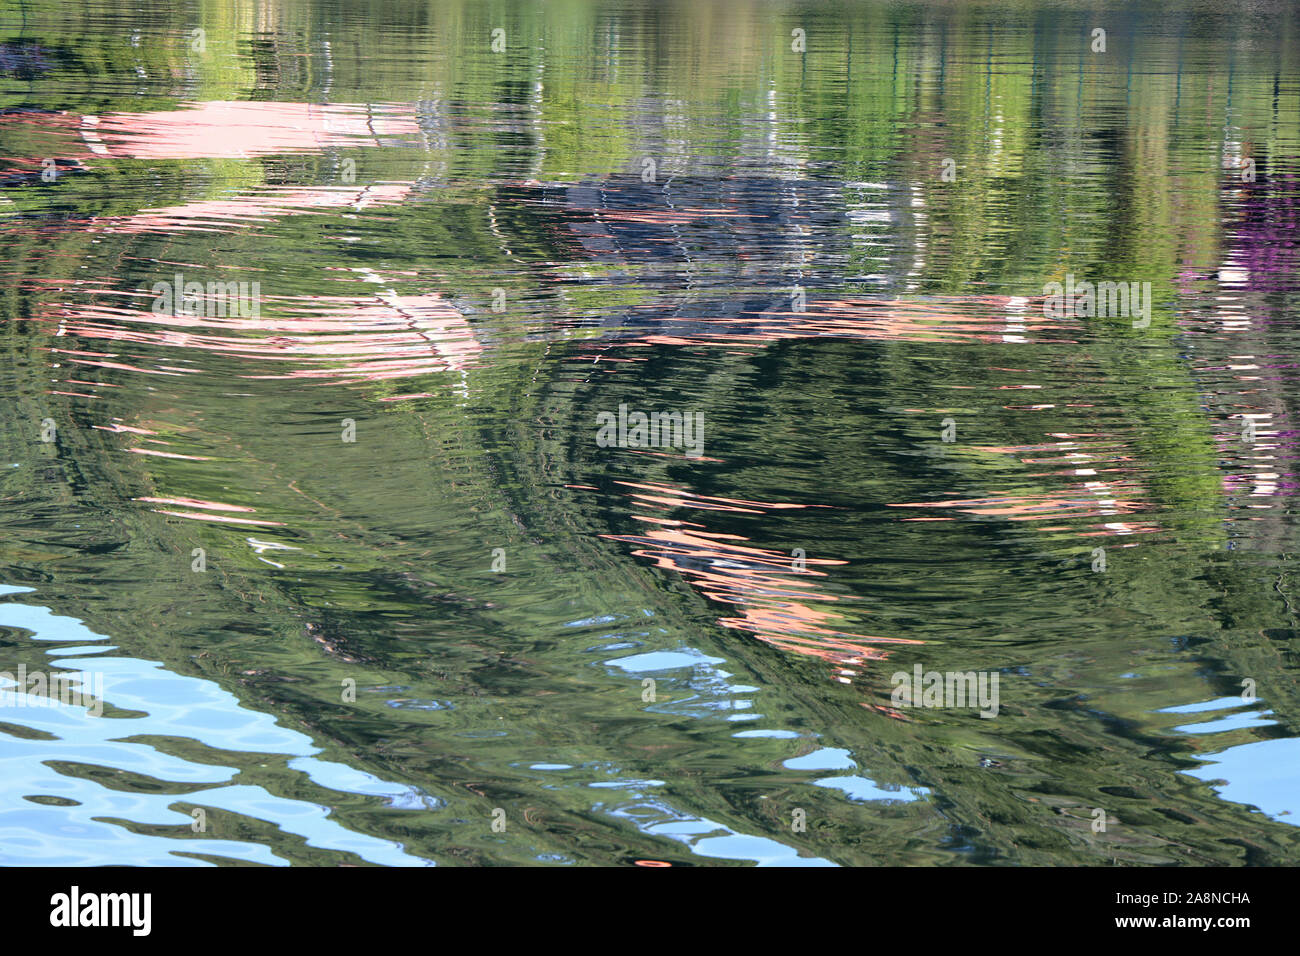 Reflection of the coast on the surface of the water as background Stock Photo